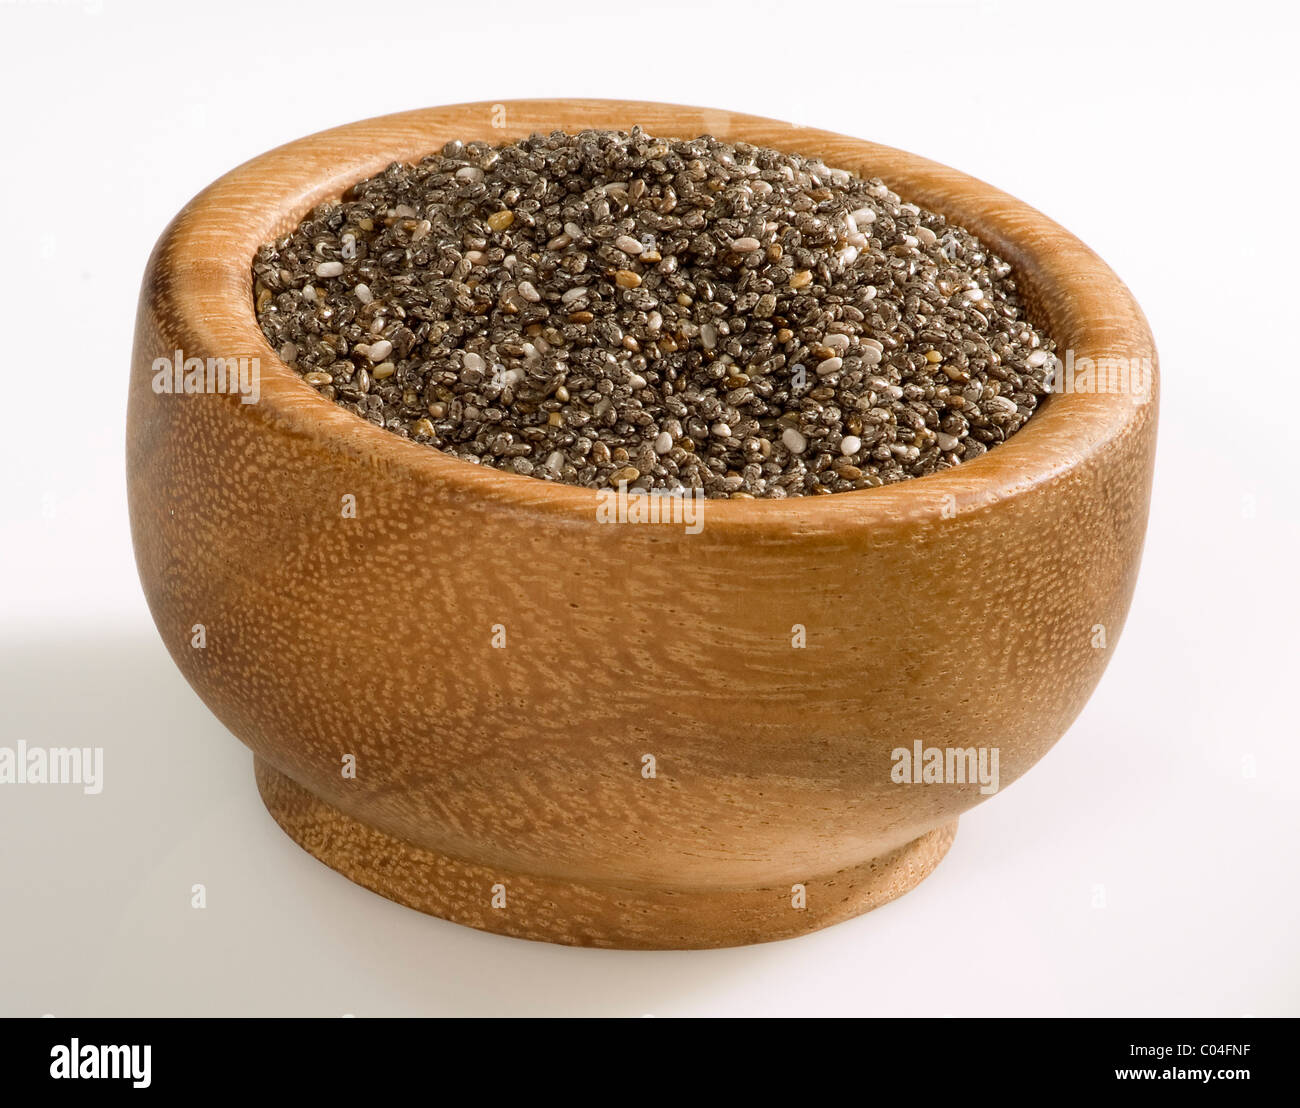 Chia seeds in a wooden bowl. Stock Photo